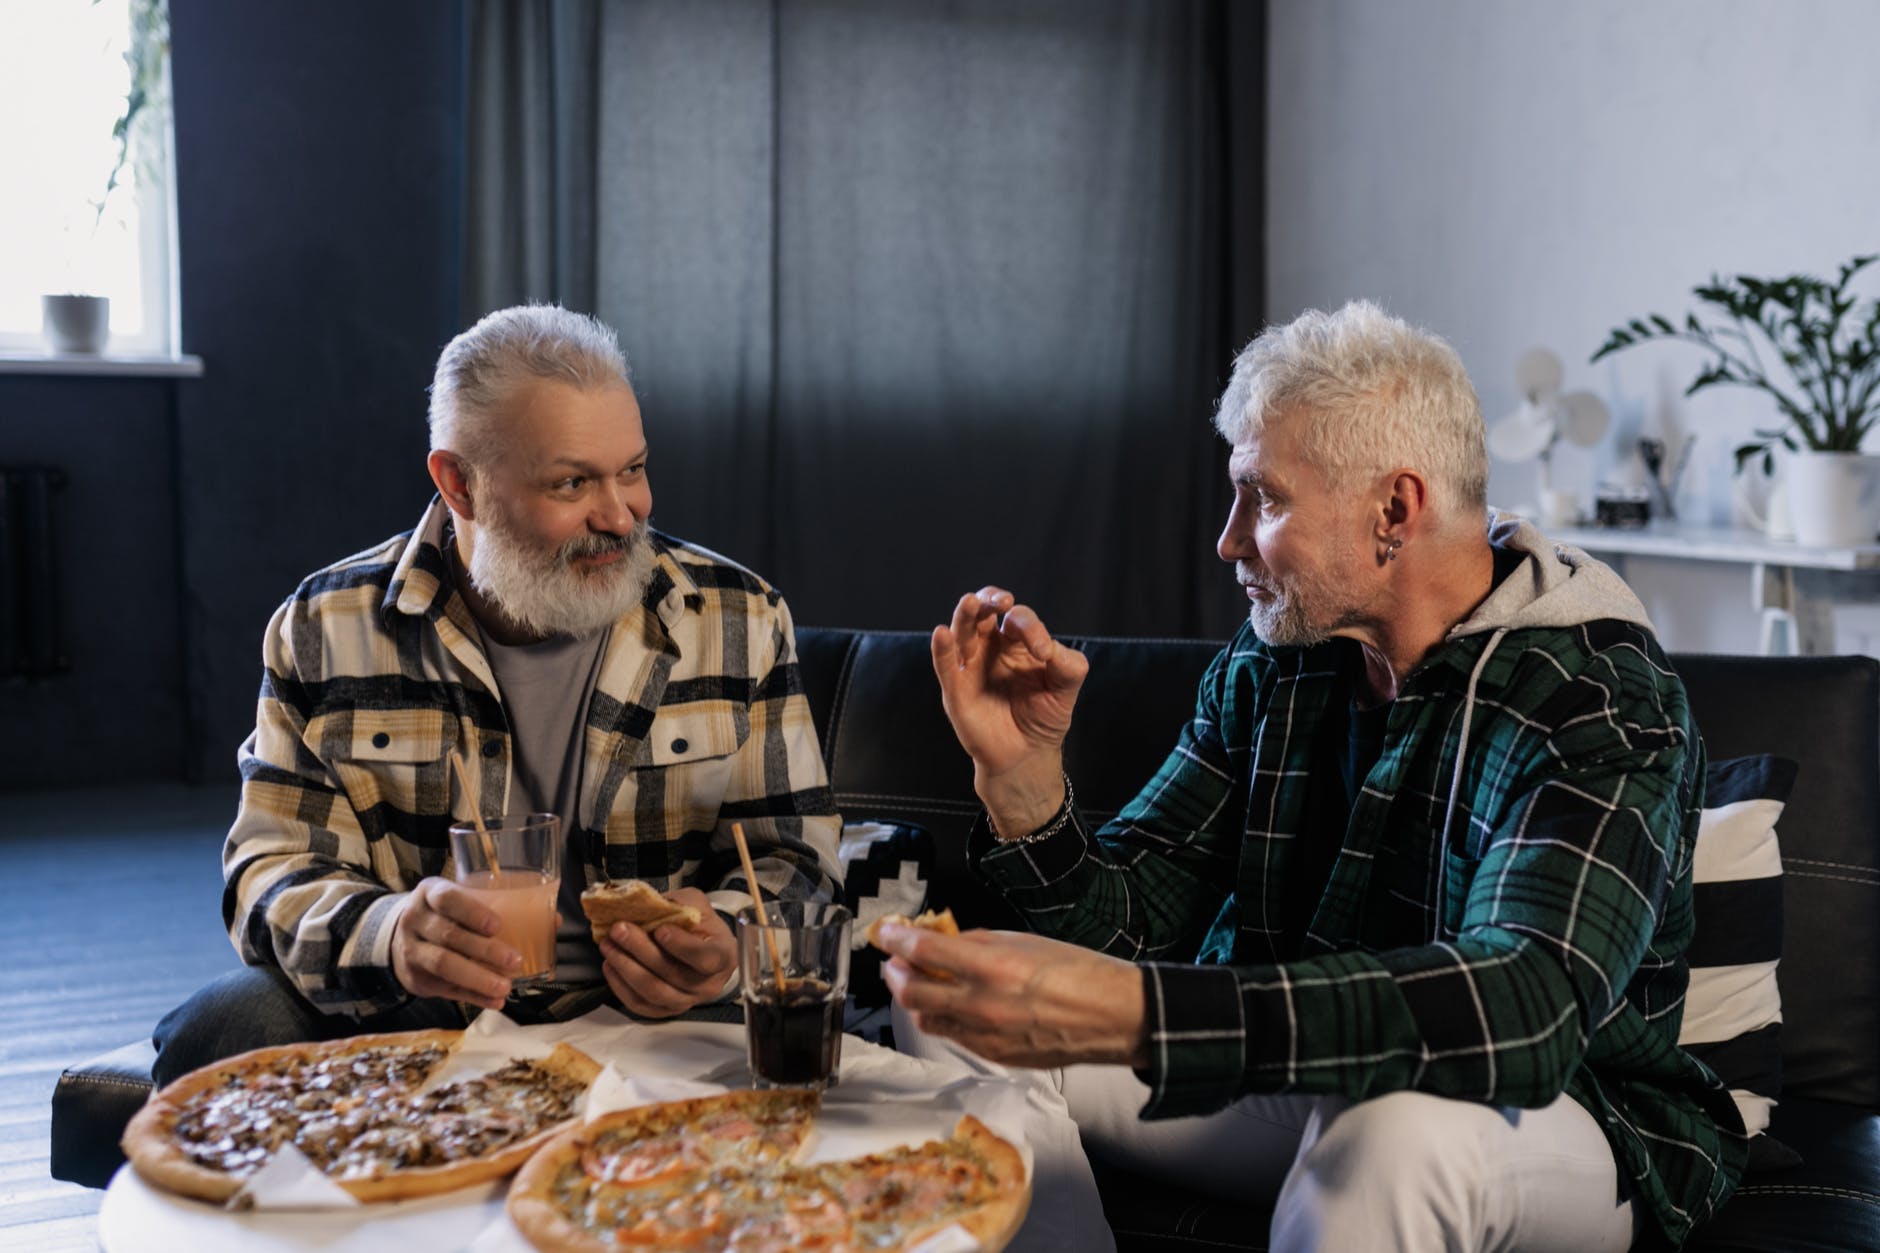 elderly men eating while talking to each other